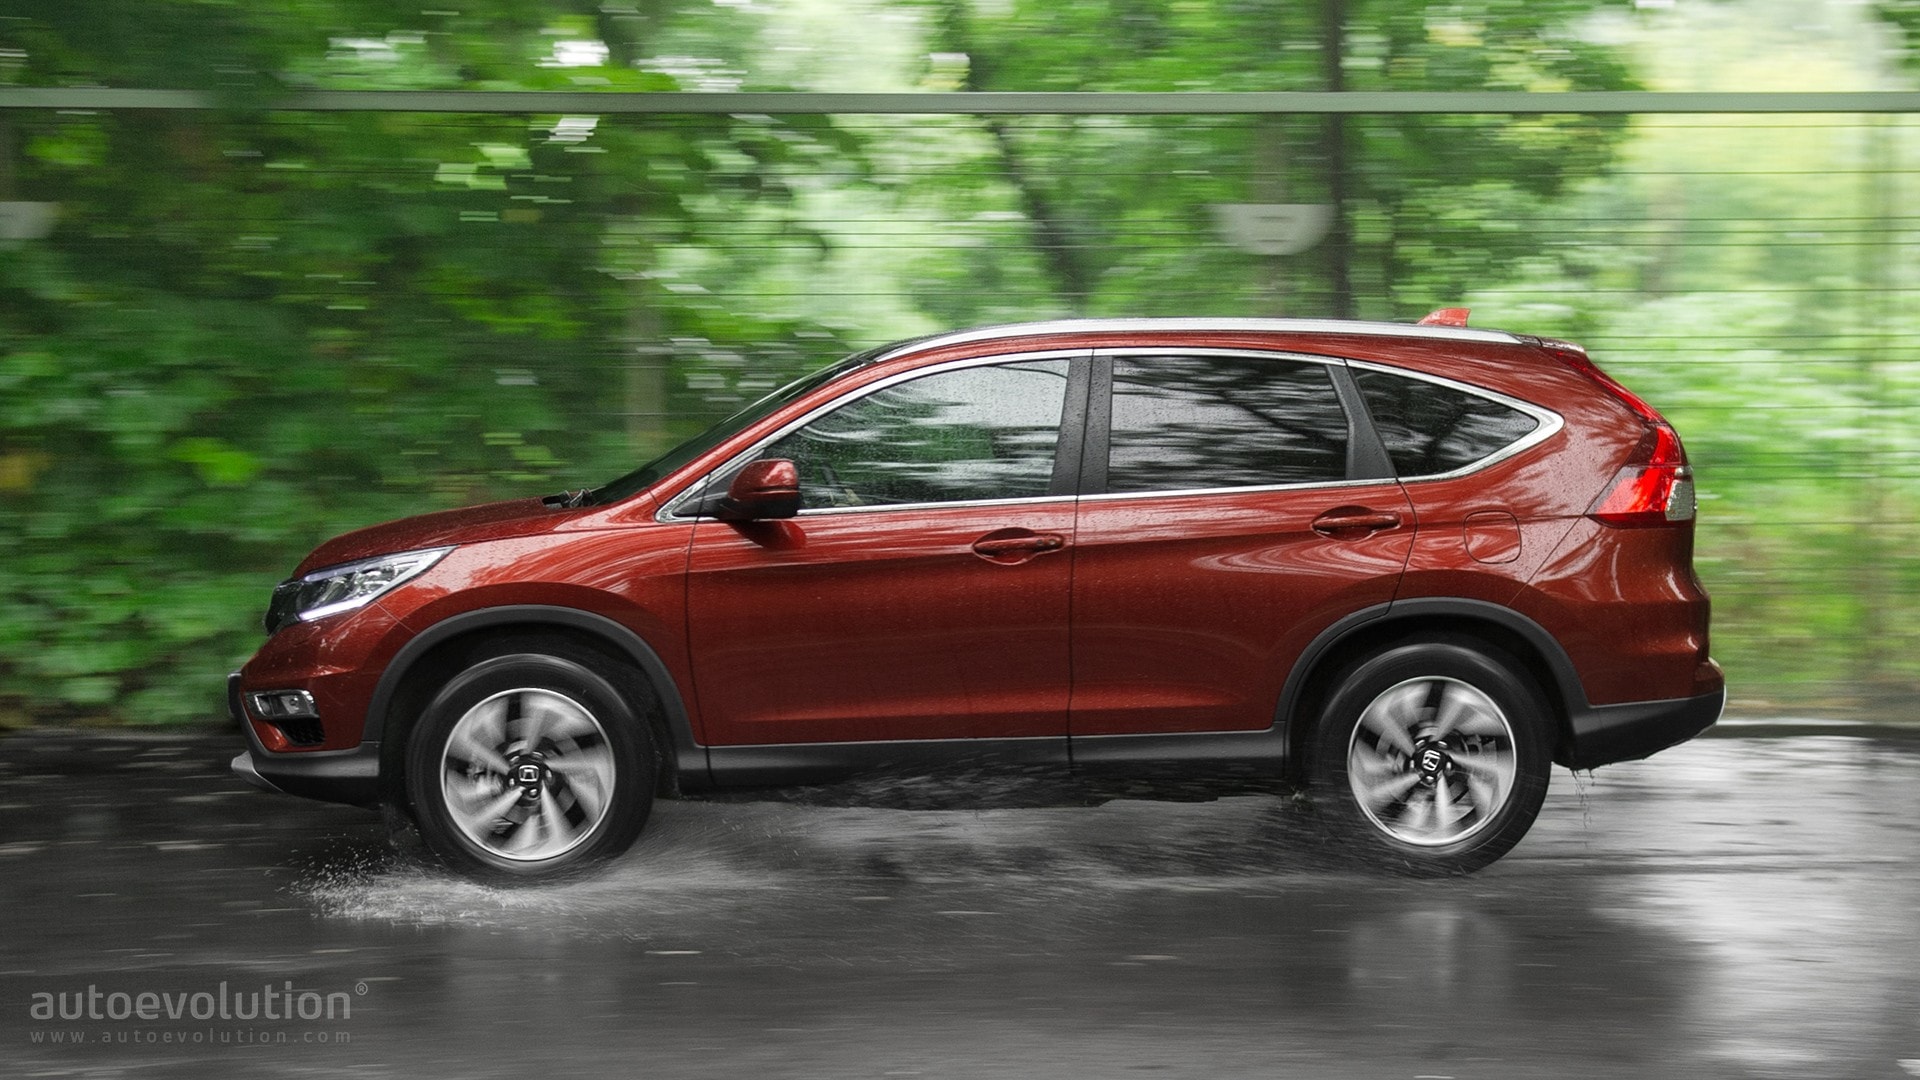 Populair ideologie Afrika Honda CR-V 1.6 i-DTEC 9AT Tested, Comfort Reaches New Heights -  autoevolution